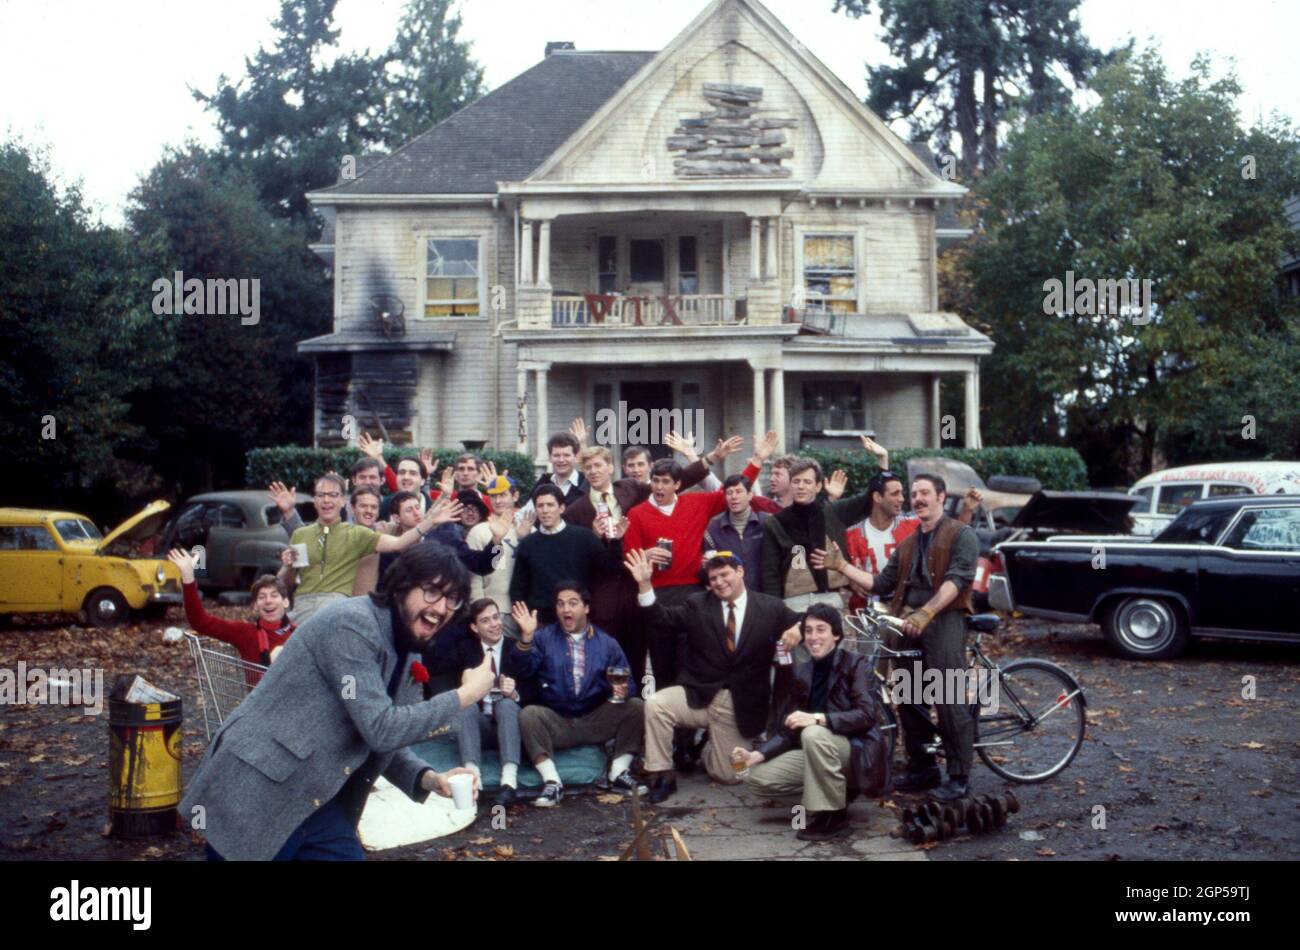 NATIONAL LAMPOON'S ANIMAL HOUSE, director John Landis (foreground left),  producer Ivan Reitman (bottom center) posing in front of the Delta Tau Chi  Frat house with cast members, from left: Joshua Daniel, Douglas